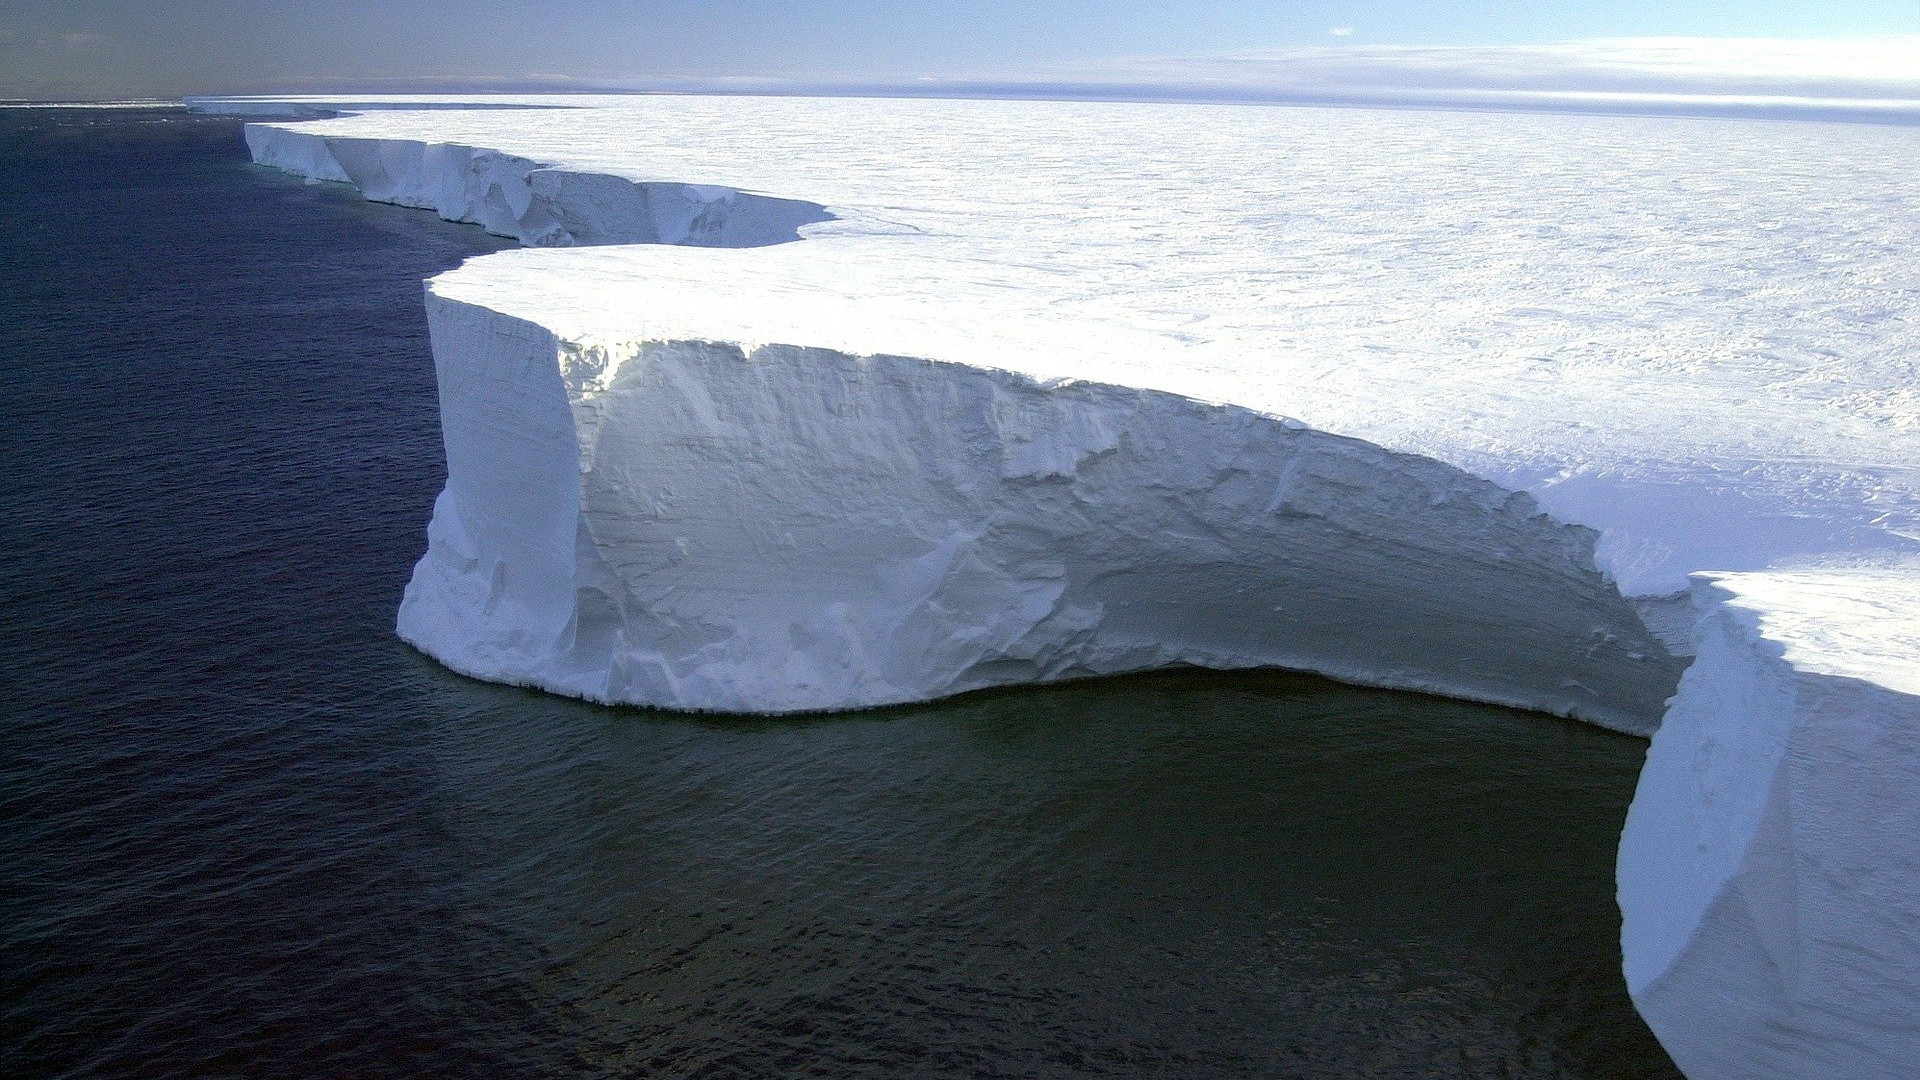 A huge white area of ice, with cliffs by the sea